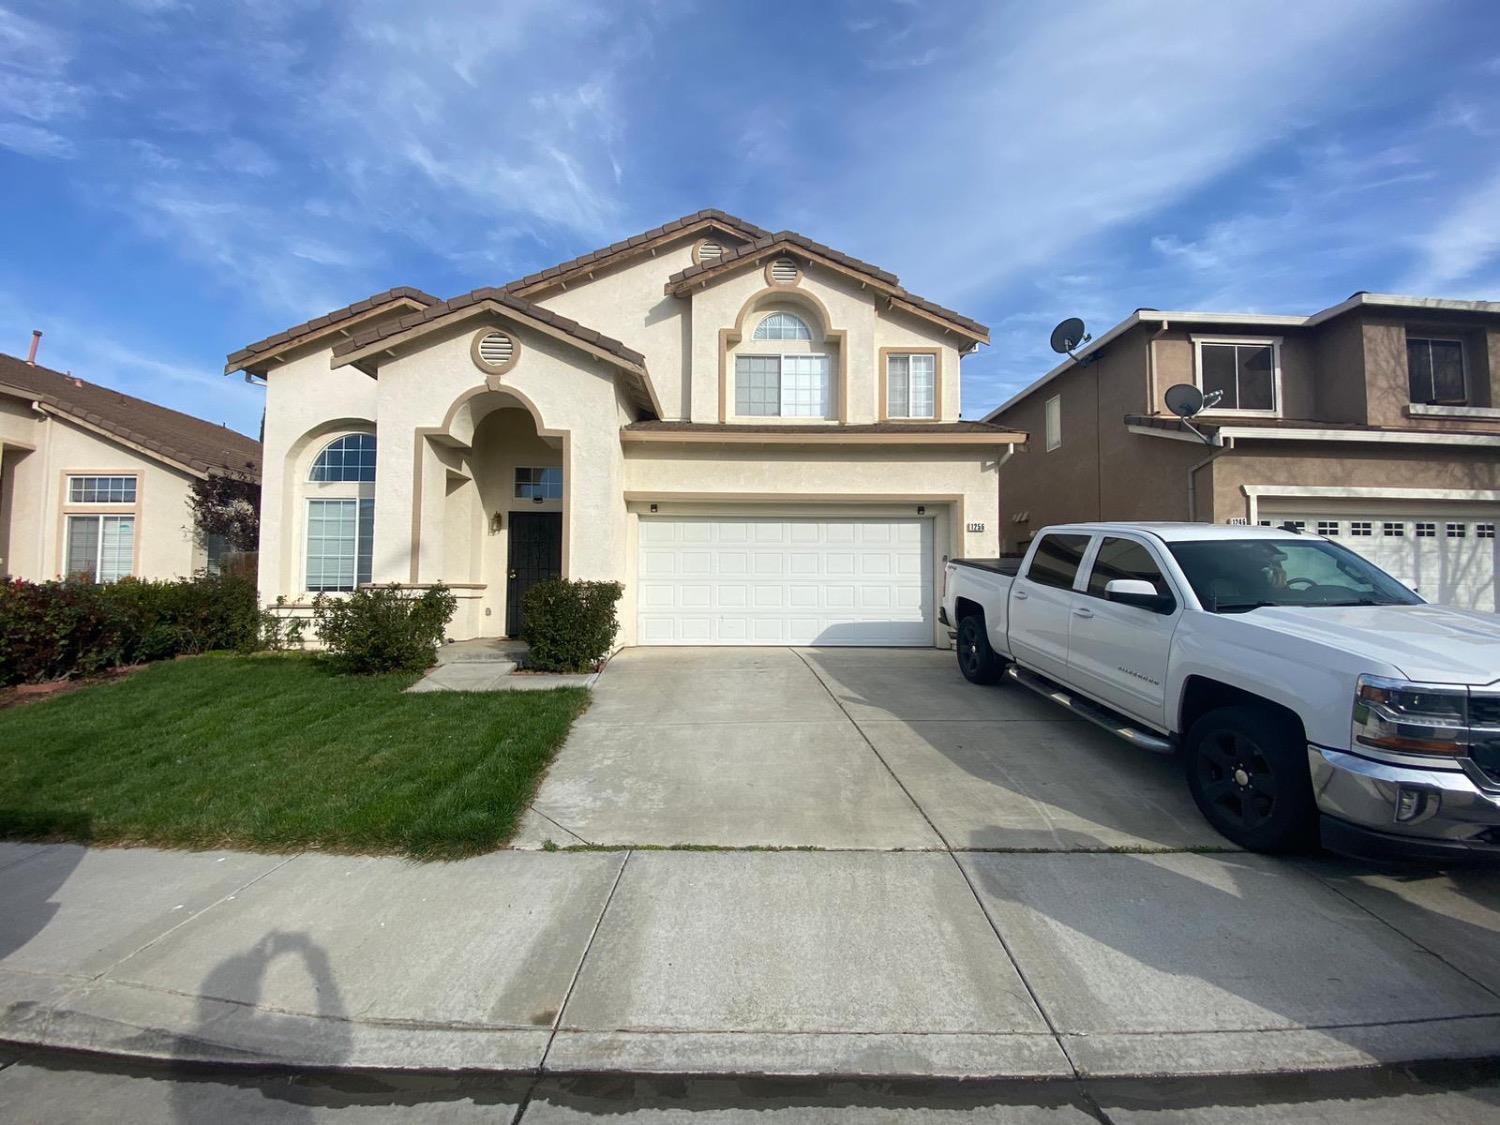 Photo of 1256 Gentry Ct in Tracy, CA